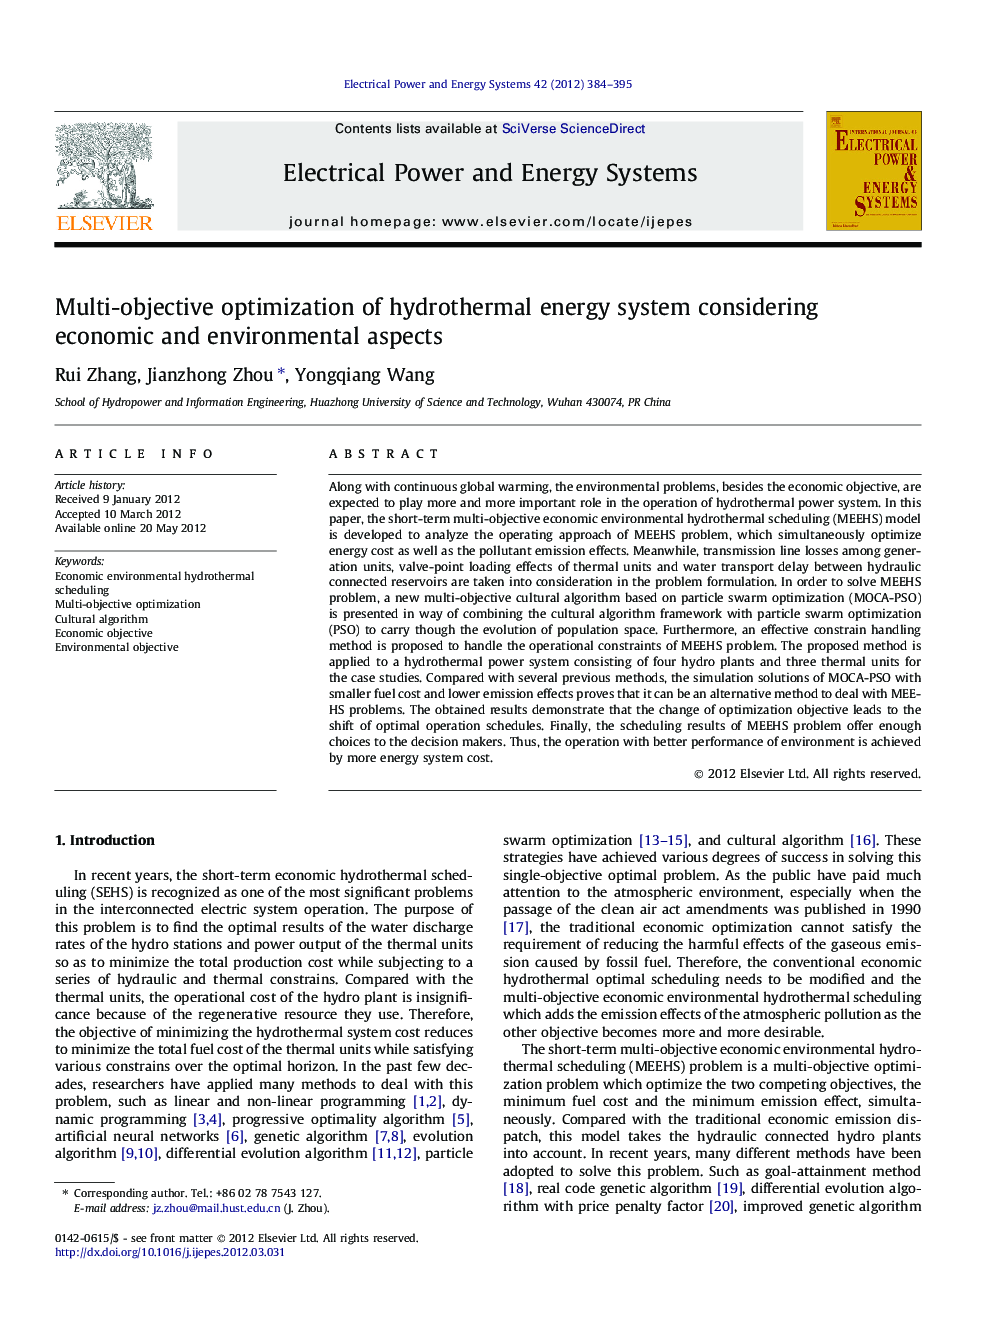 Multi-objective optimization of hydrothermal energy system considering economic and environmental aspects